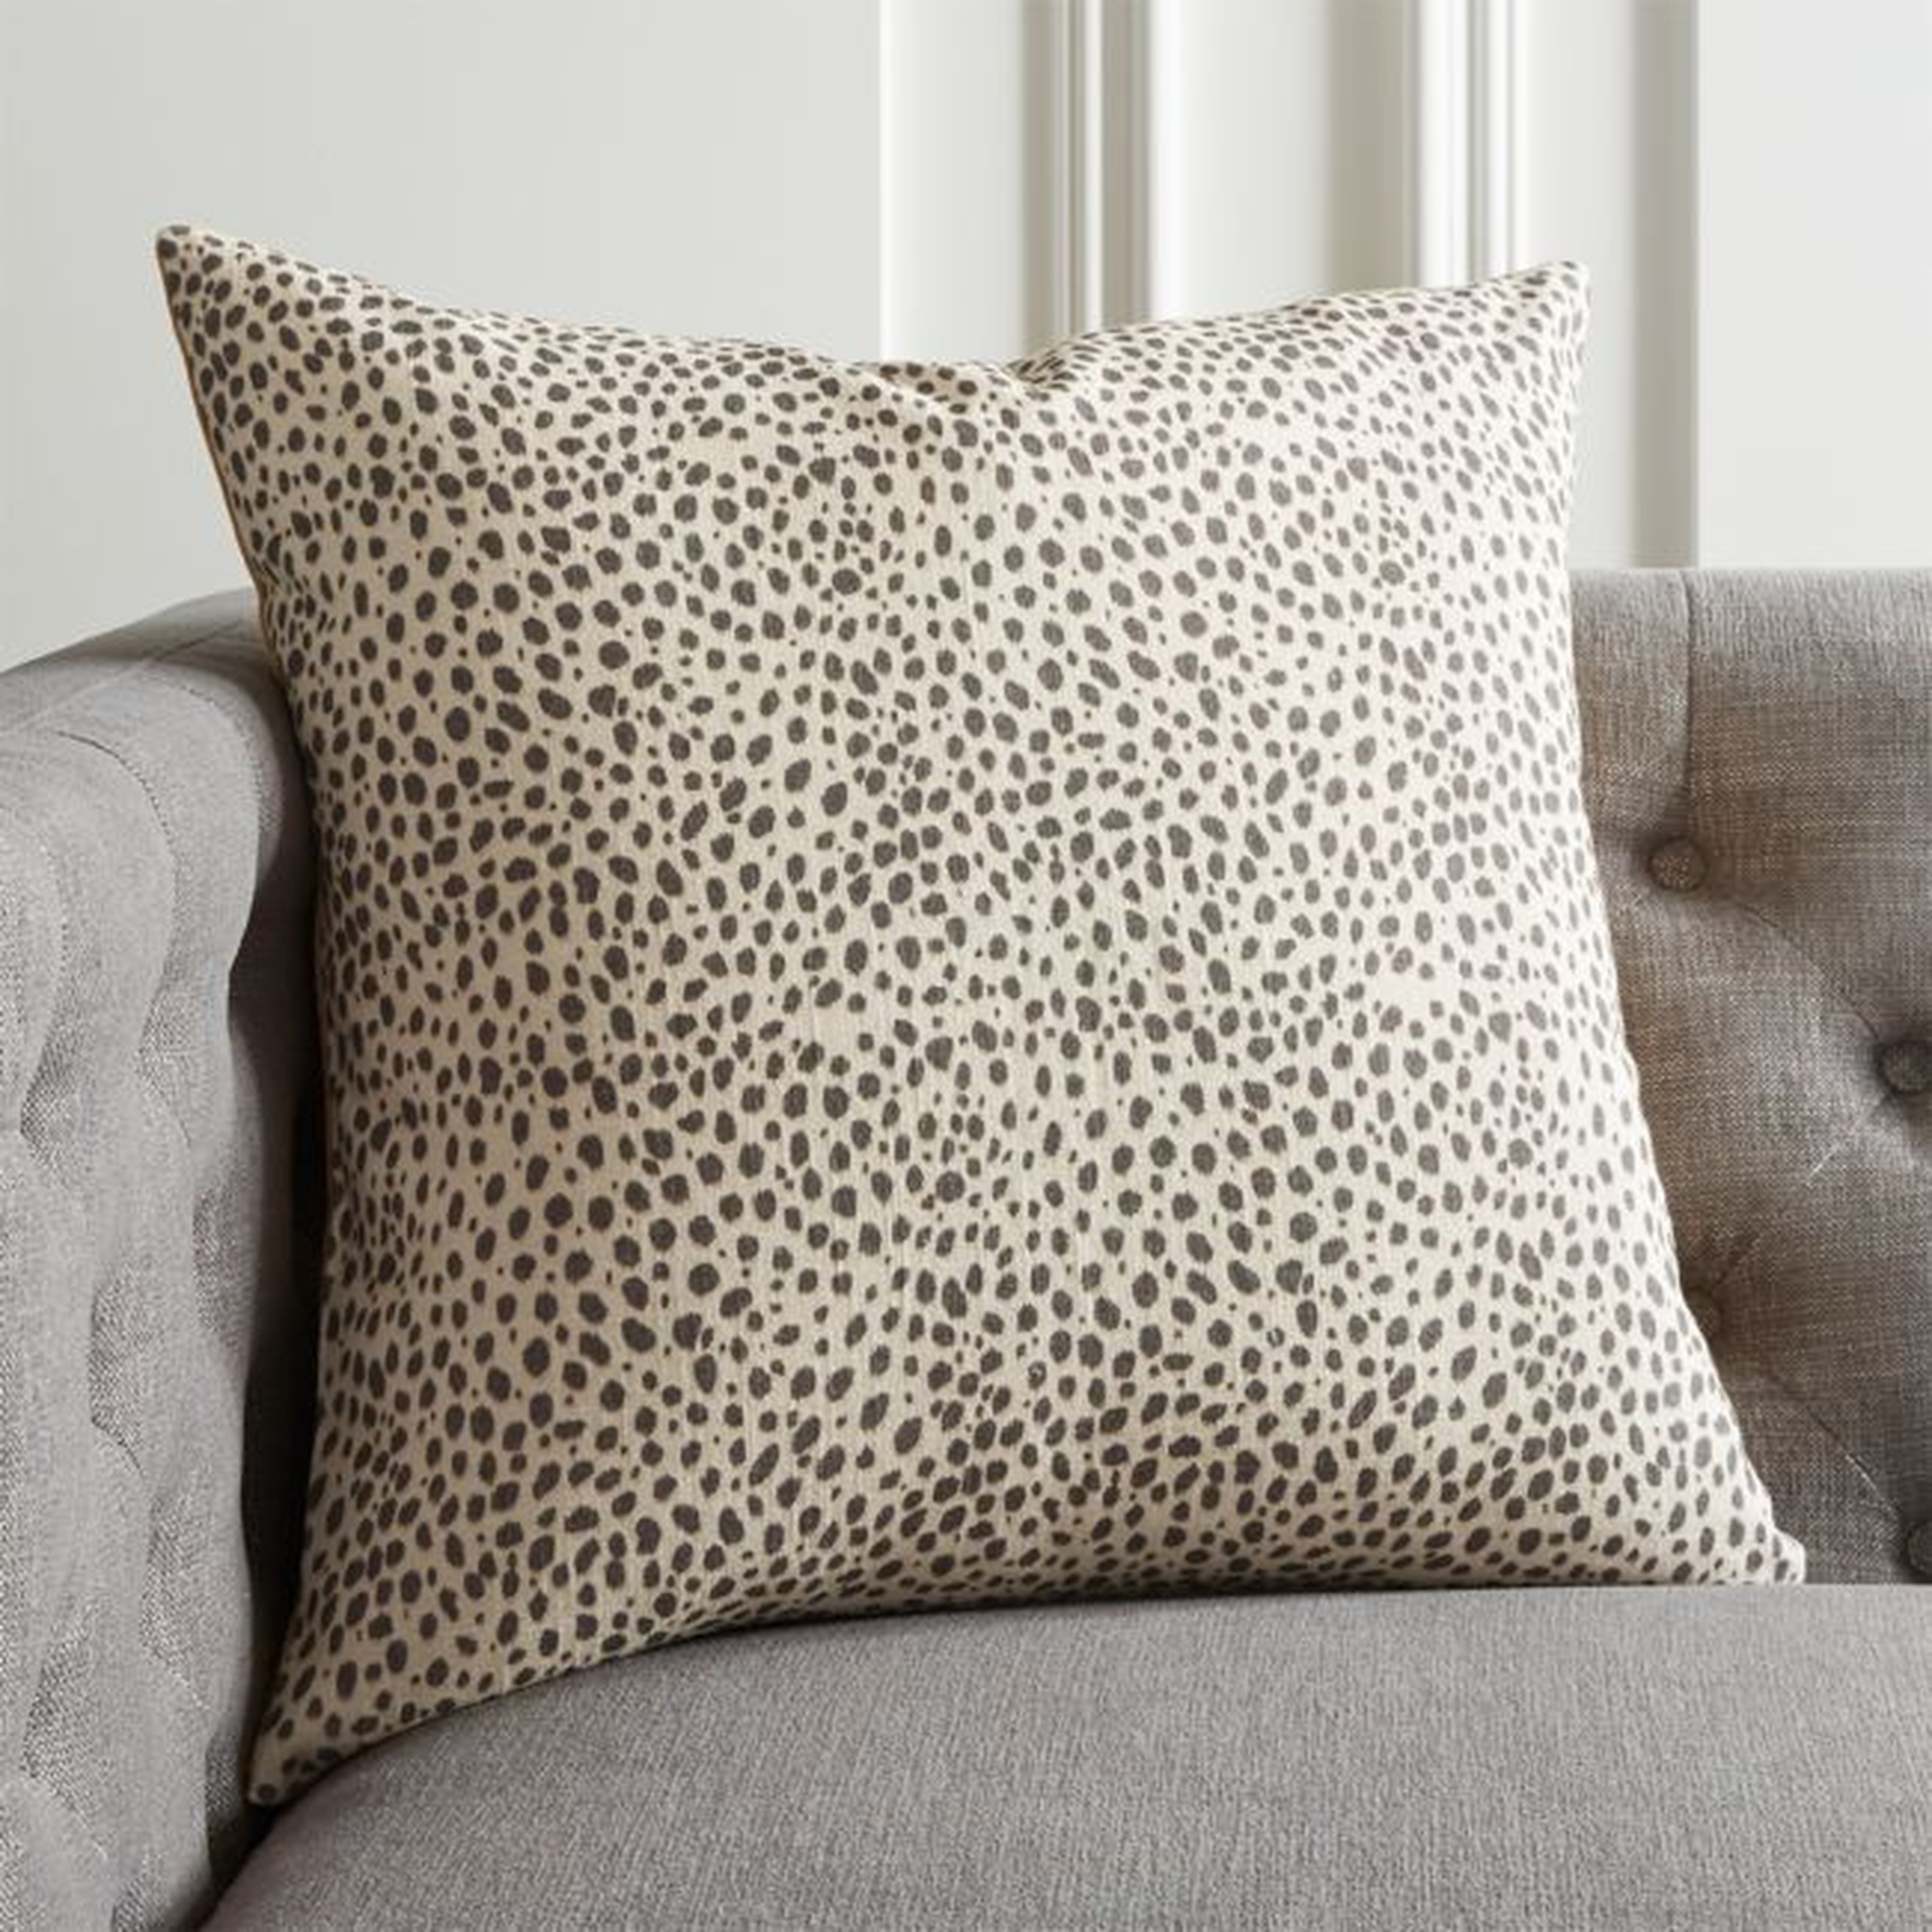 20" Nahla Cheetah Pillow with Feather-Down Insert - CB2